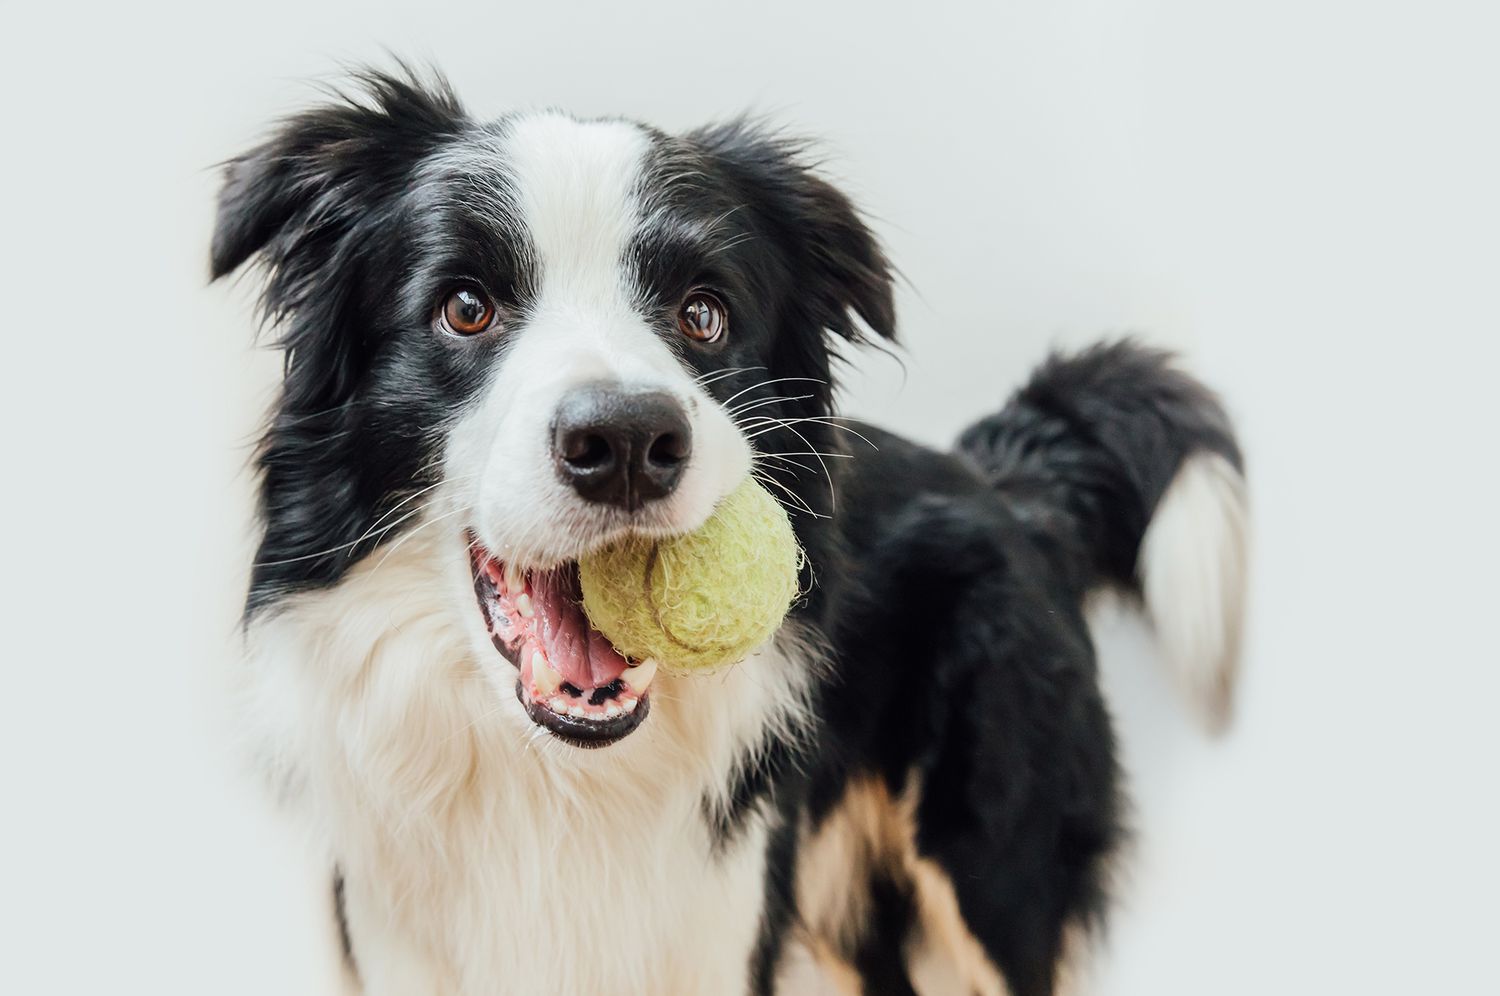 Black and white border collie holding toy ball in mouth